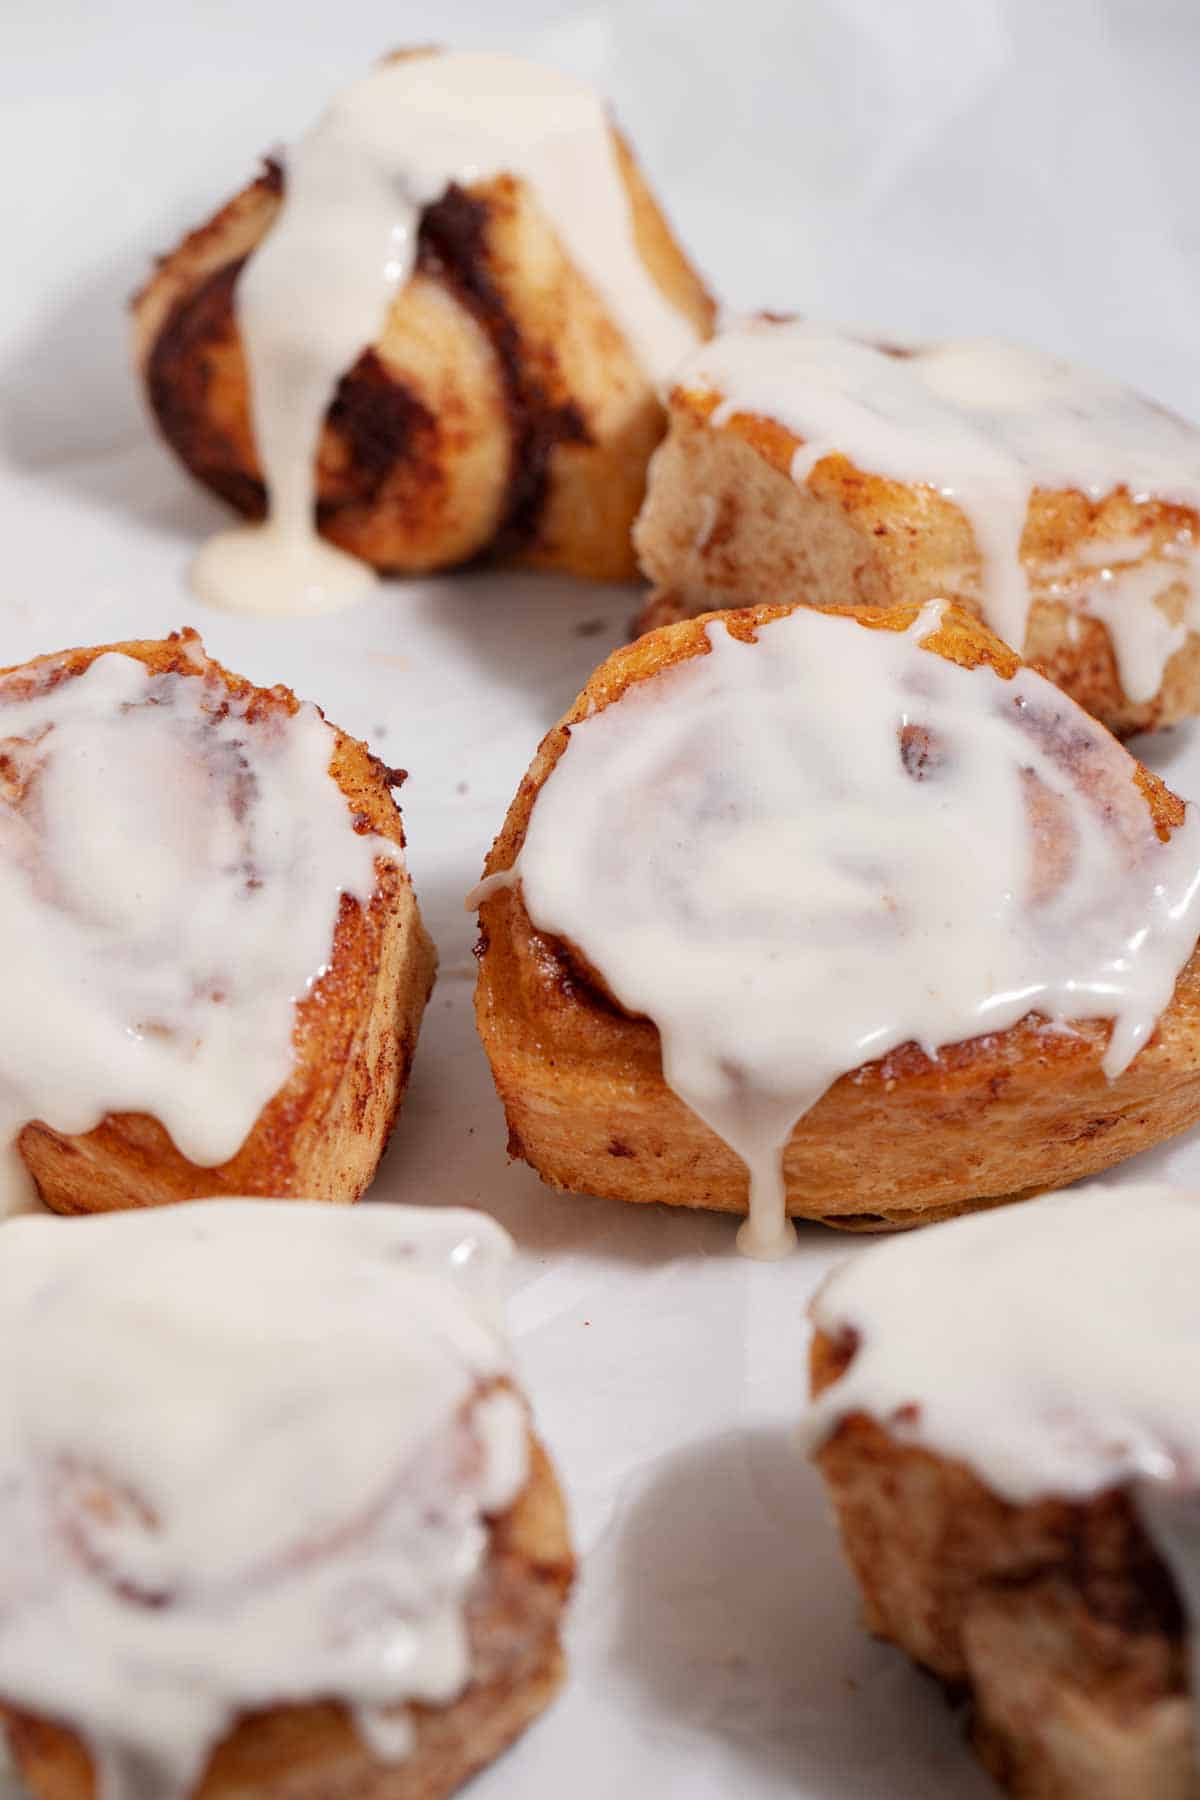 Group of cinnamon rolls with icing dripping off them.